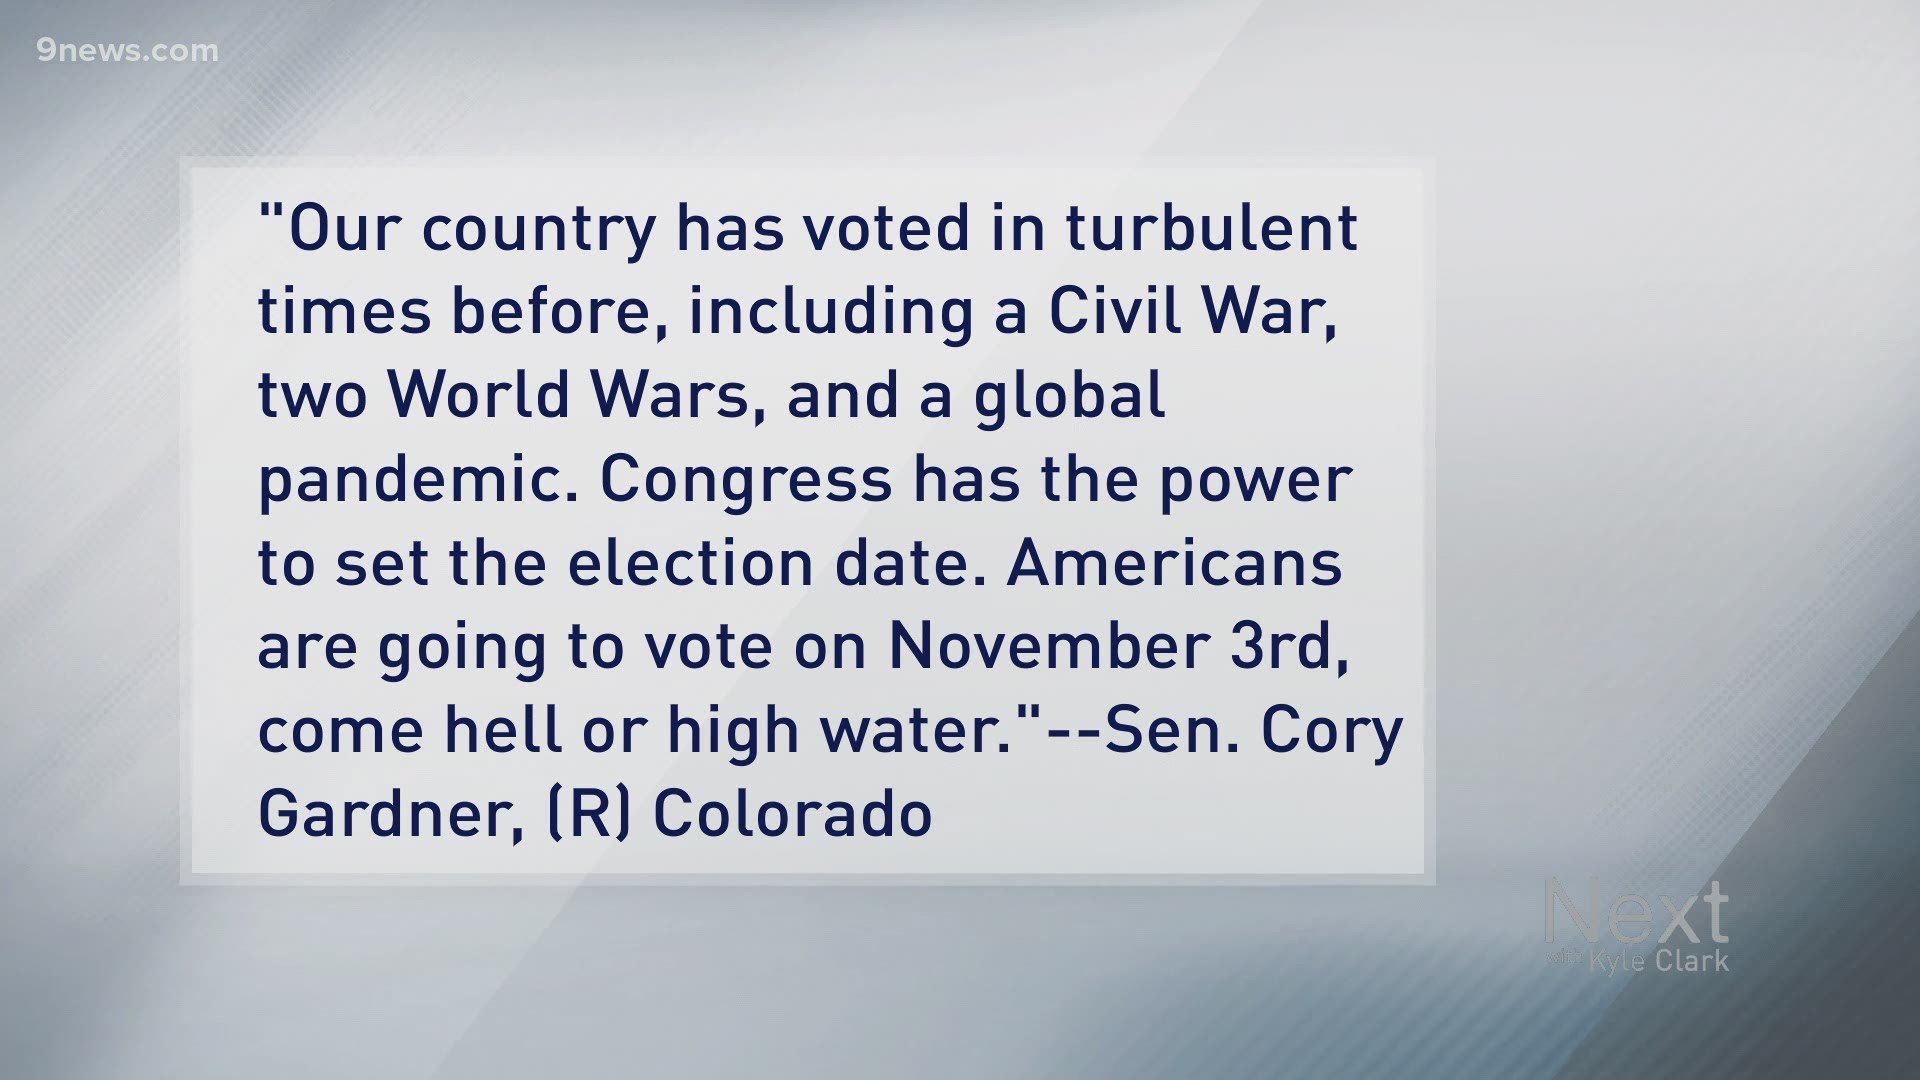 The president asked on Twitter if the general election should be delayed, which needs Congressional approval. Colorado Republican Sen. Cory Gardner opposes it.